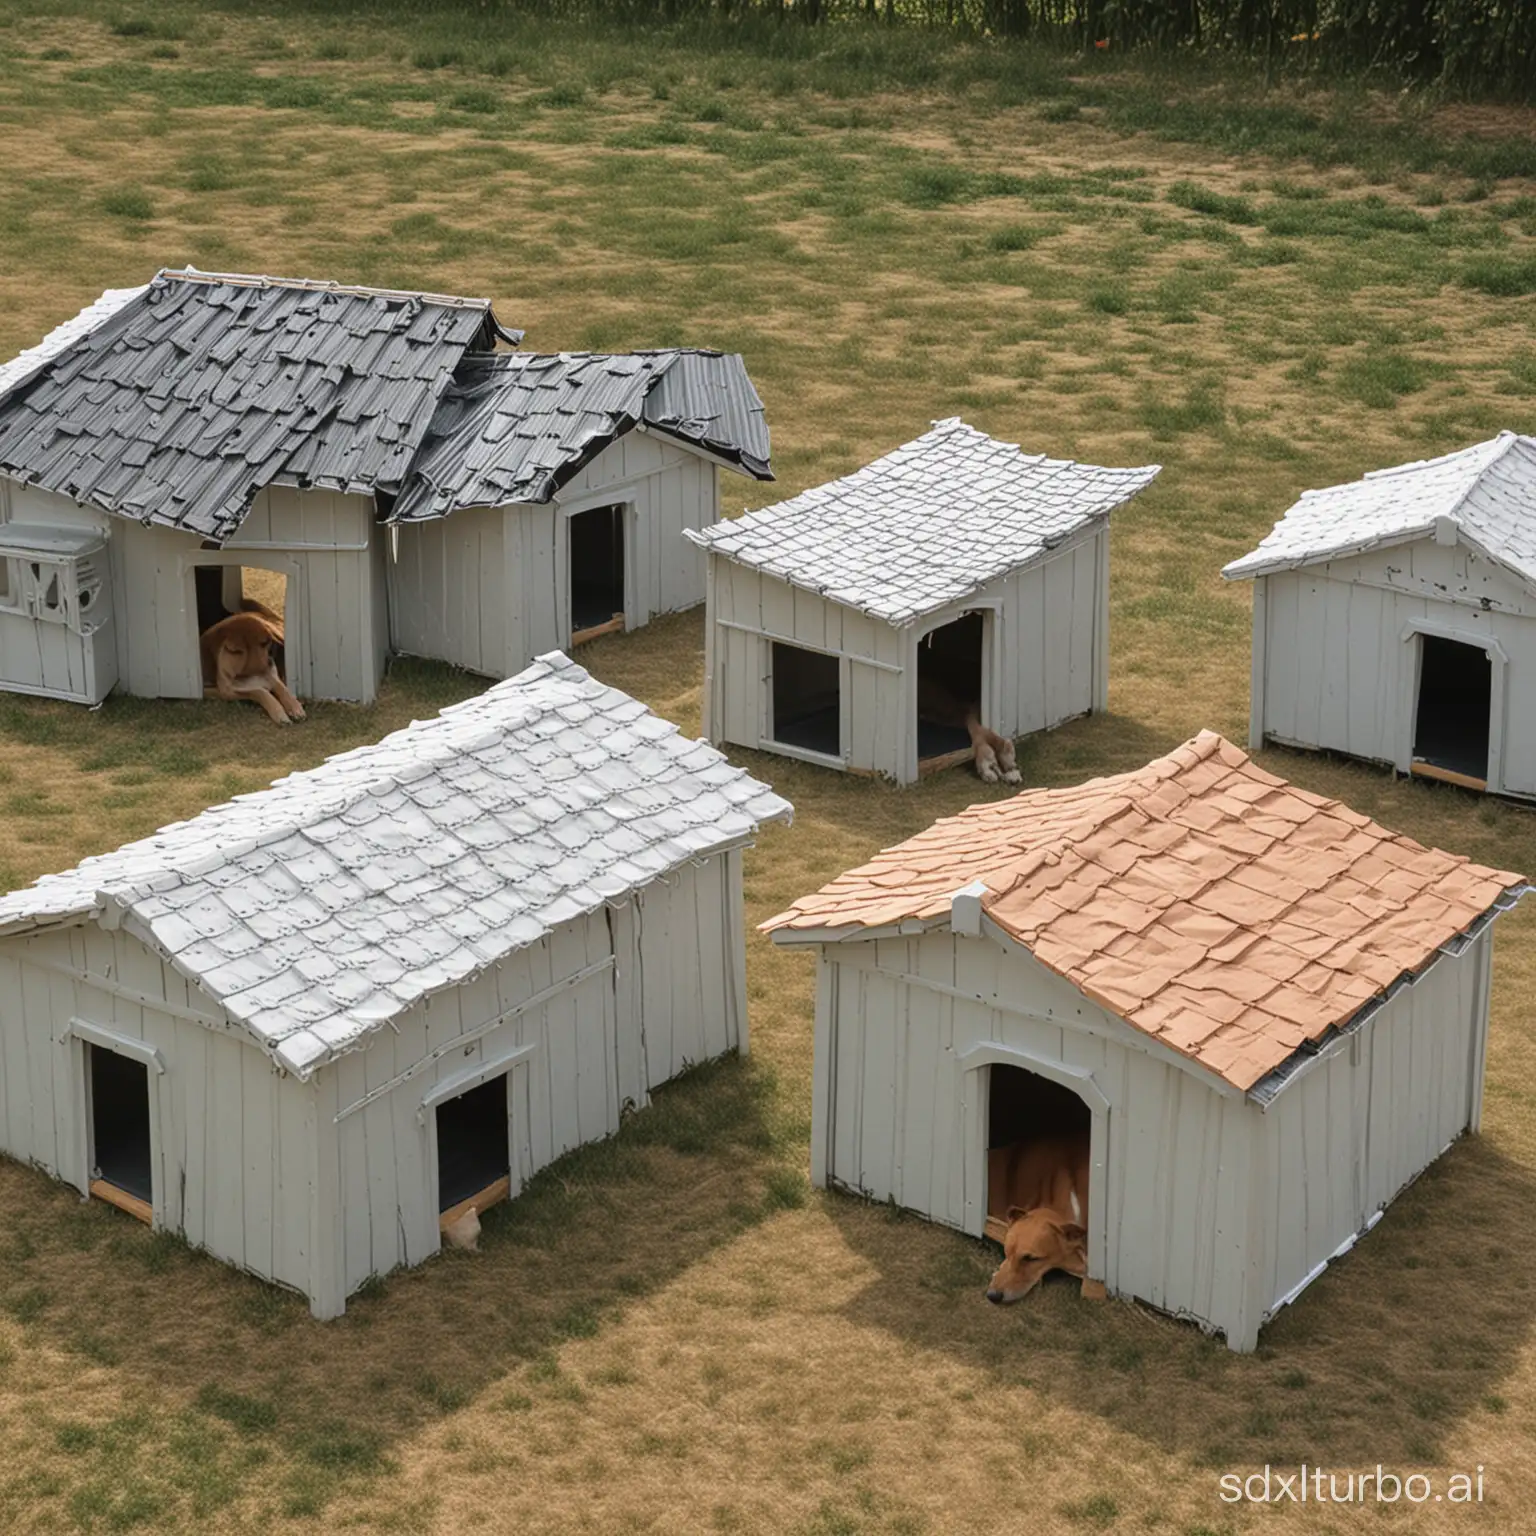 1 dog king has eight sets of dog houses, eight sets of 200 square meters big dog houses, 8 sets